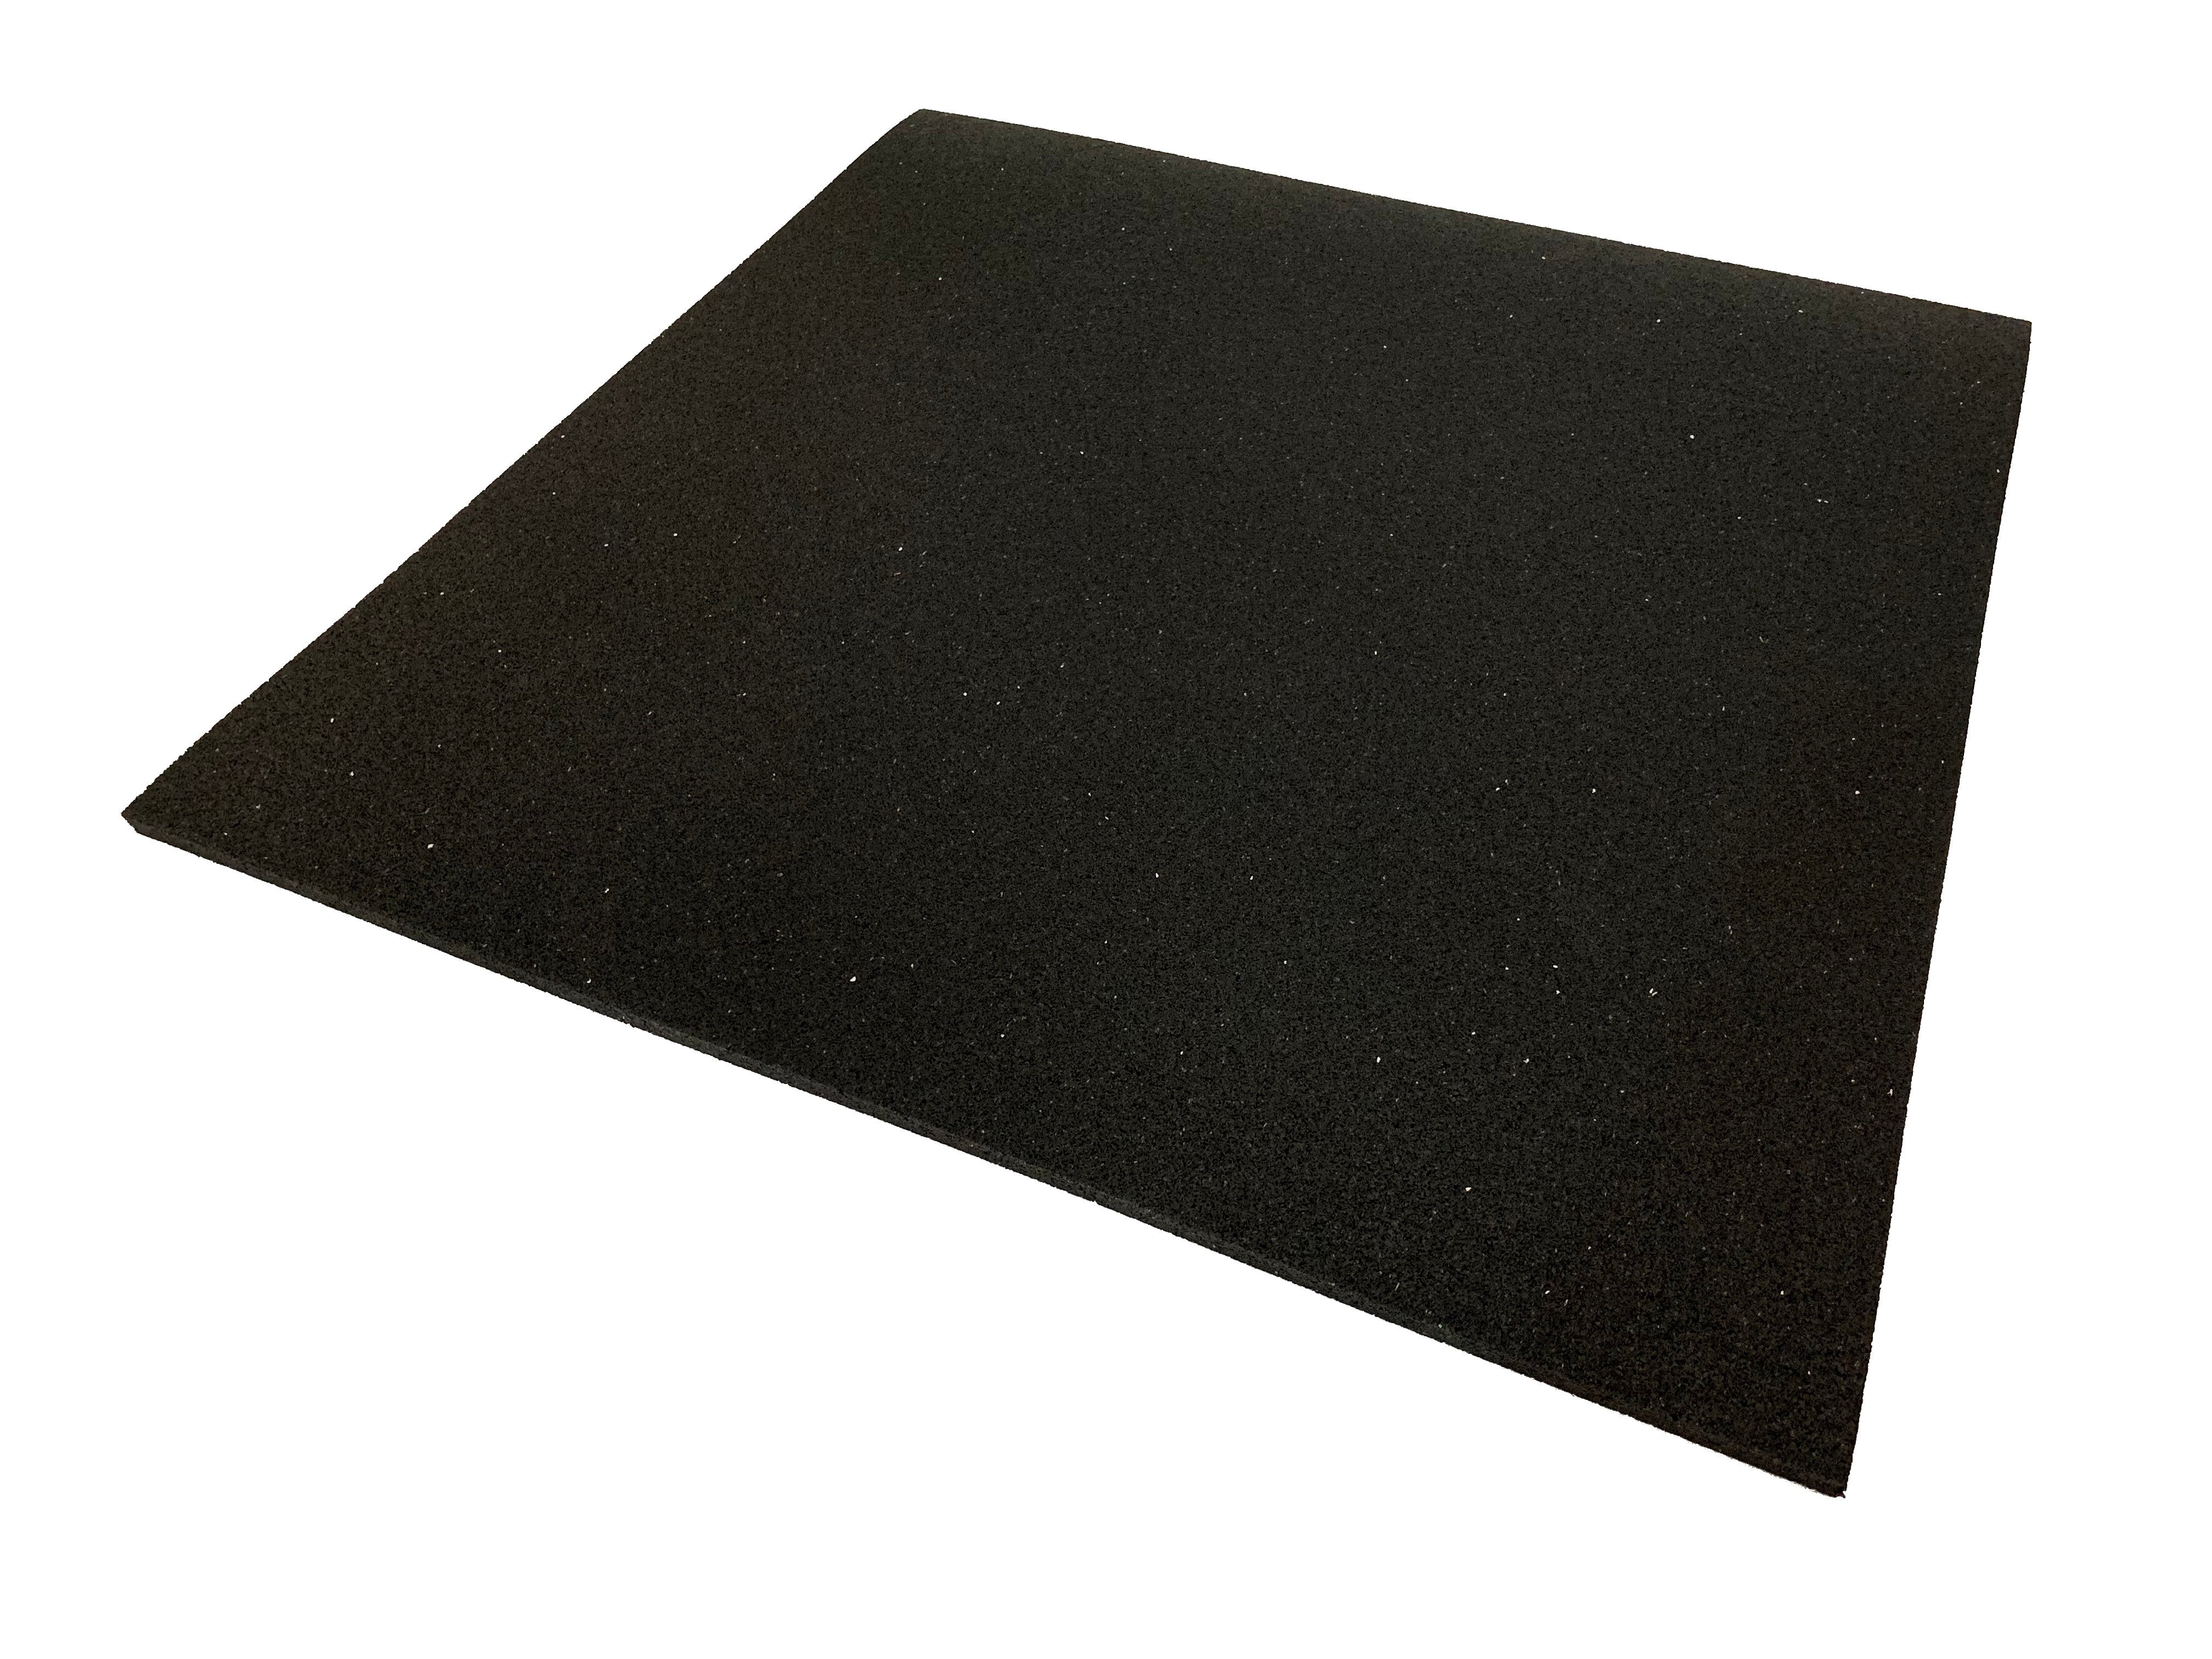 M20 Acoustic Soundproofing Mat - Size - 1m by 1m sheets, 20mm thick - Advanced Acoustics